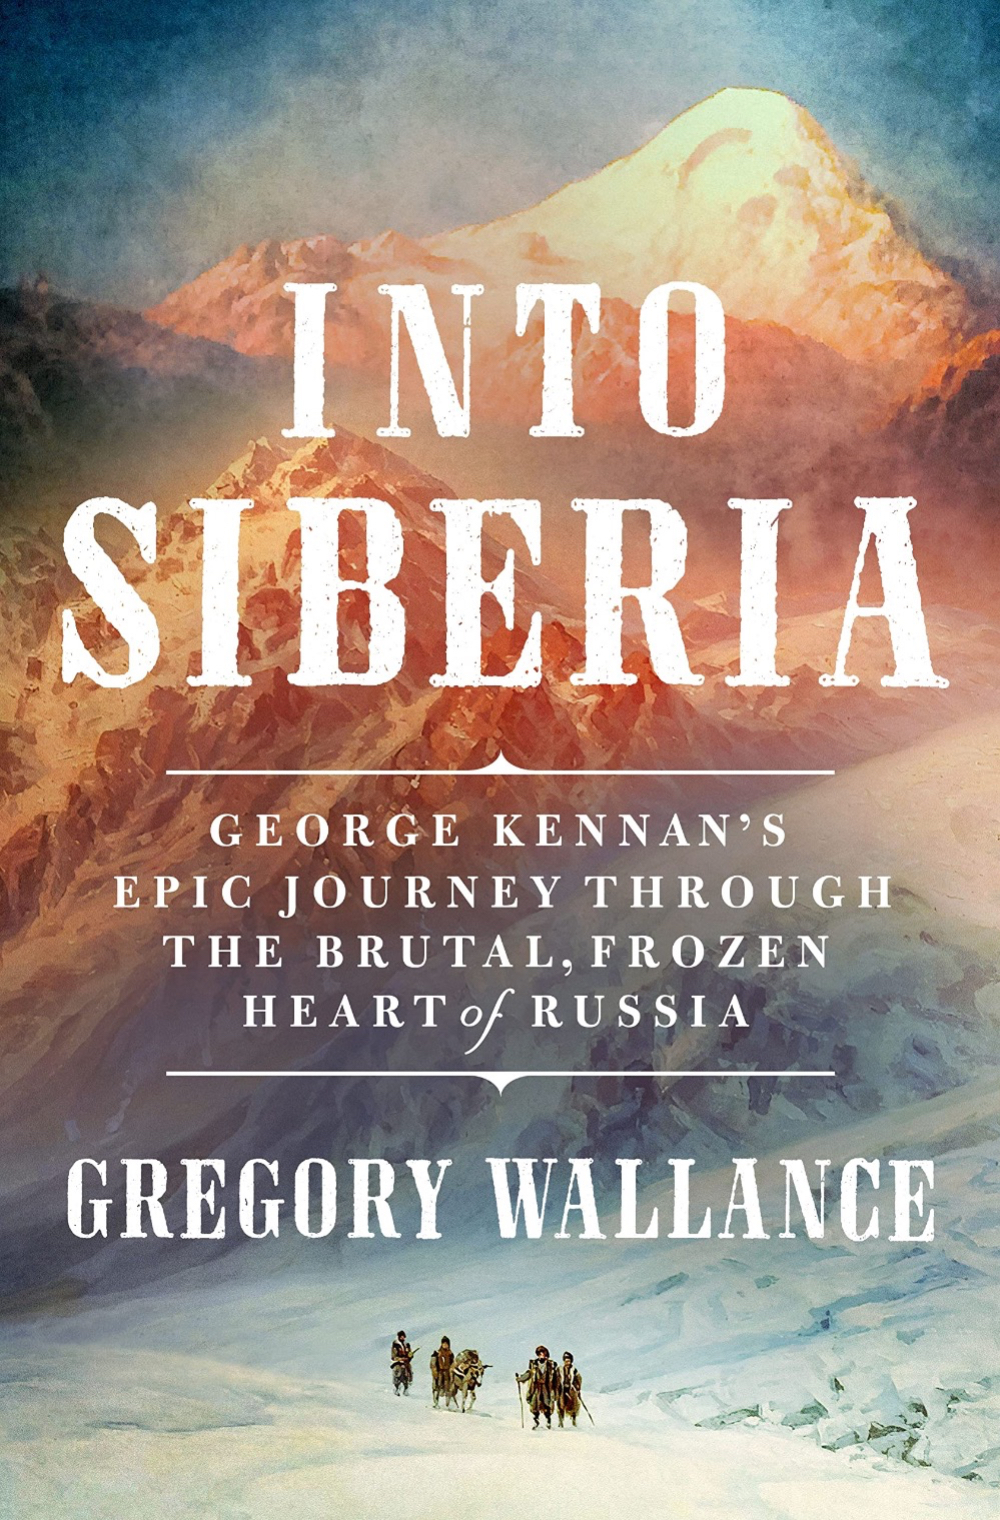 Into Siberia: George Kennen's Epic Journey Through the Brutal, Frozen Heart of Russia by Gregory Wallance